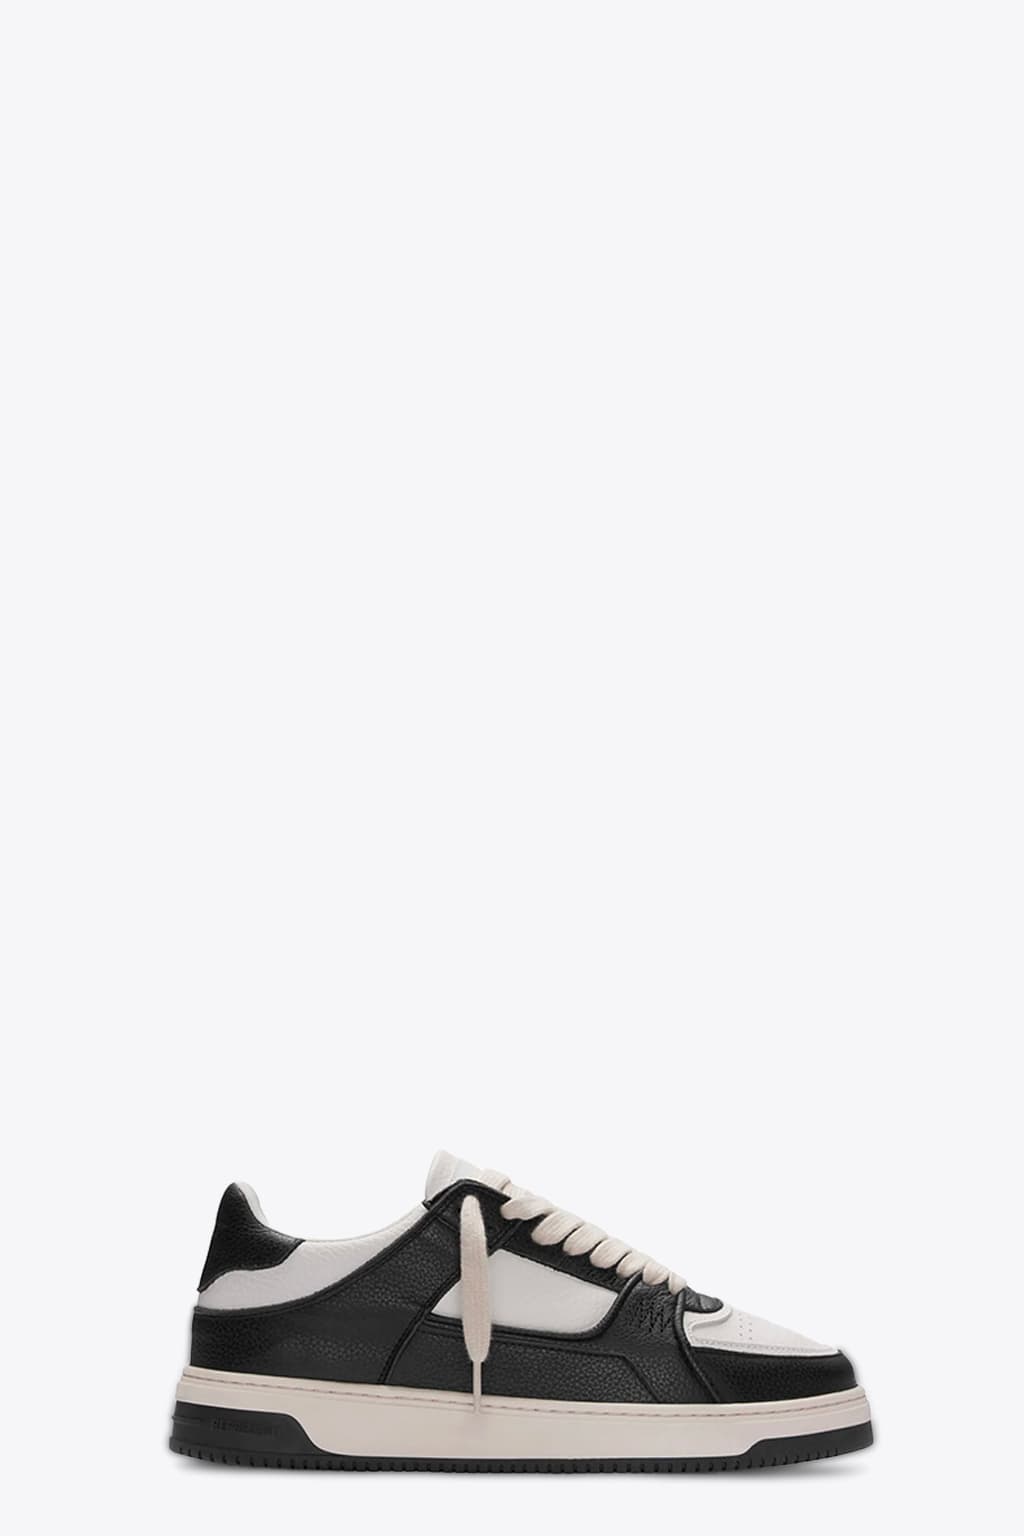 Apex Off White And Black Leather Low Top Sneaker - Apex Sneakers